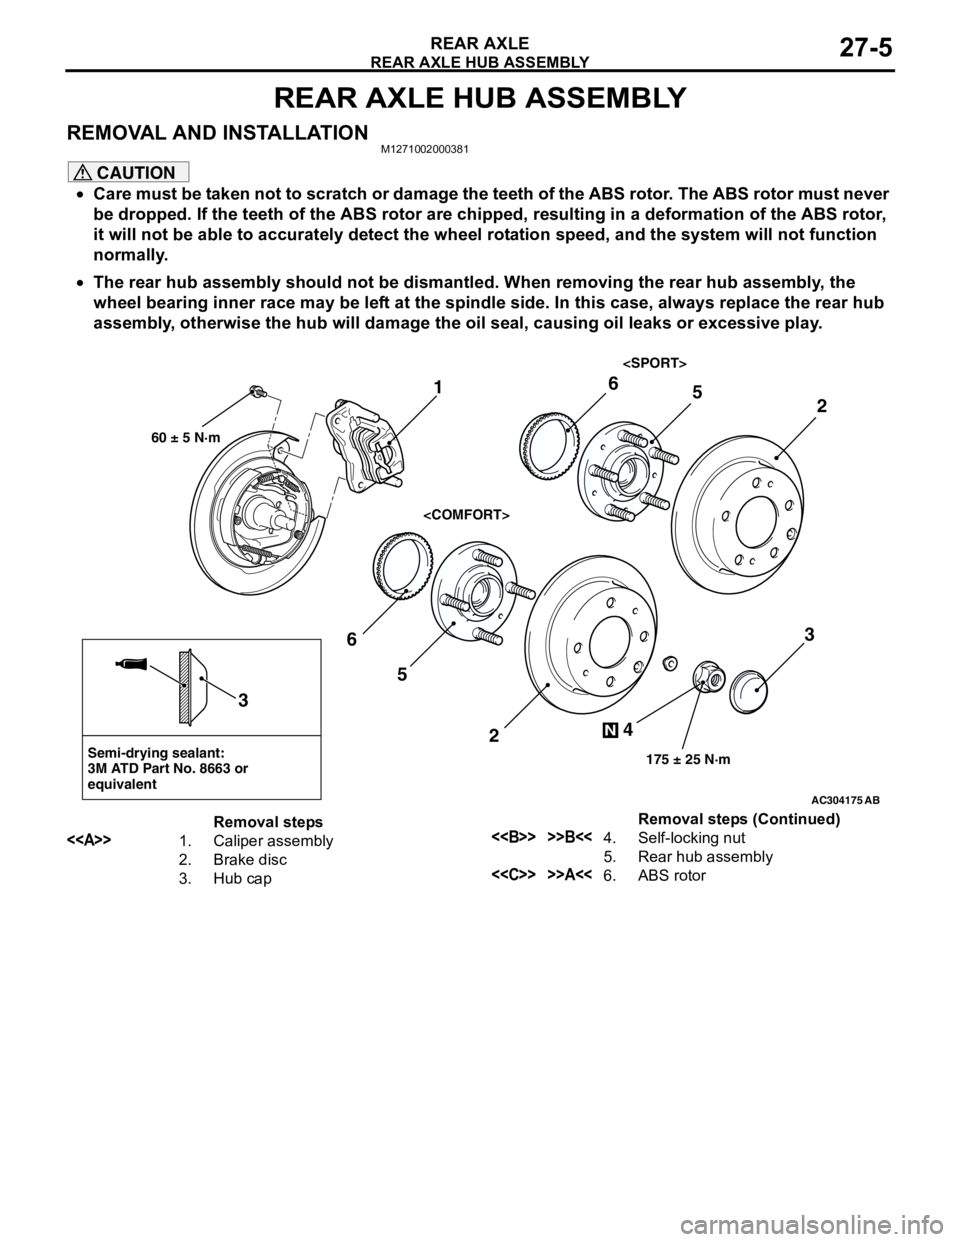 MITSUBISHI LANCER 2005  Workshop Manual REAR AXLE HUB ASSEMBLY
REAR AXLE27-5
REAR AXLE HUB ASSEMBLY
REMOVAL AND INSTALLATIONM1271002000381
CAUTION
•Care must be taken not to scratch or damage the teeth of the ABS rotor. The ABS rotor must